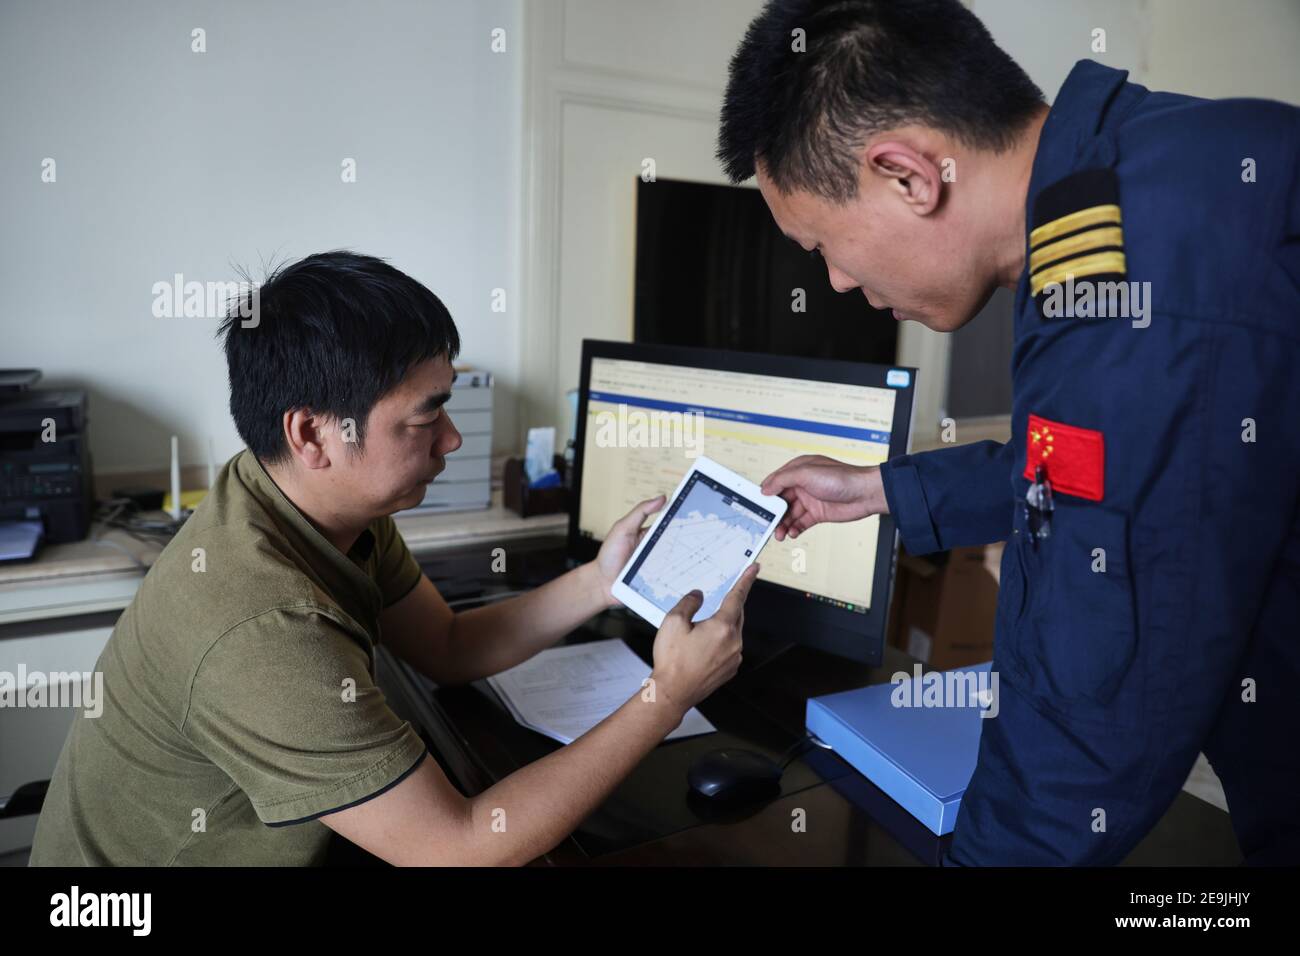 (210205) -- SANYA, Feb. 5, 2021 (Xinhua) -- Li Hangbing (L) and Sun Dongsheng, both members of the Nanhai No. 1 Flying Service of Ministry of Transport, an air rescue and aid team, make a flight plan in Sanya City of south China's Hainan Province, Jan. 29, 2021. Critical moments of life or death are of a common memory to all members of the air rescue and aid team. As the only state-run force of air rescue and aid over waters around south China, the team has brought 94 people back to safety in 2020 alone. Amid each onslaught of typhoon when all ships haste home, rescue helicopters of the team a Stock Photo